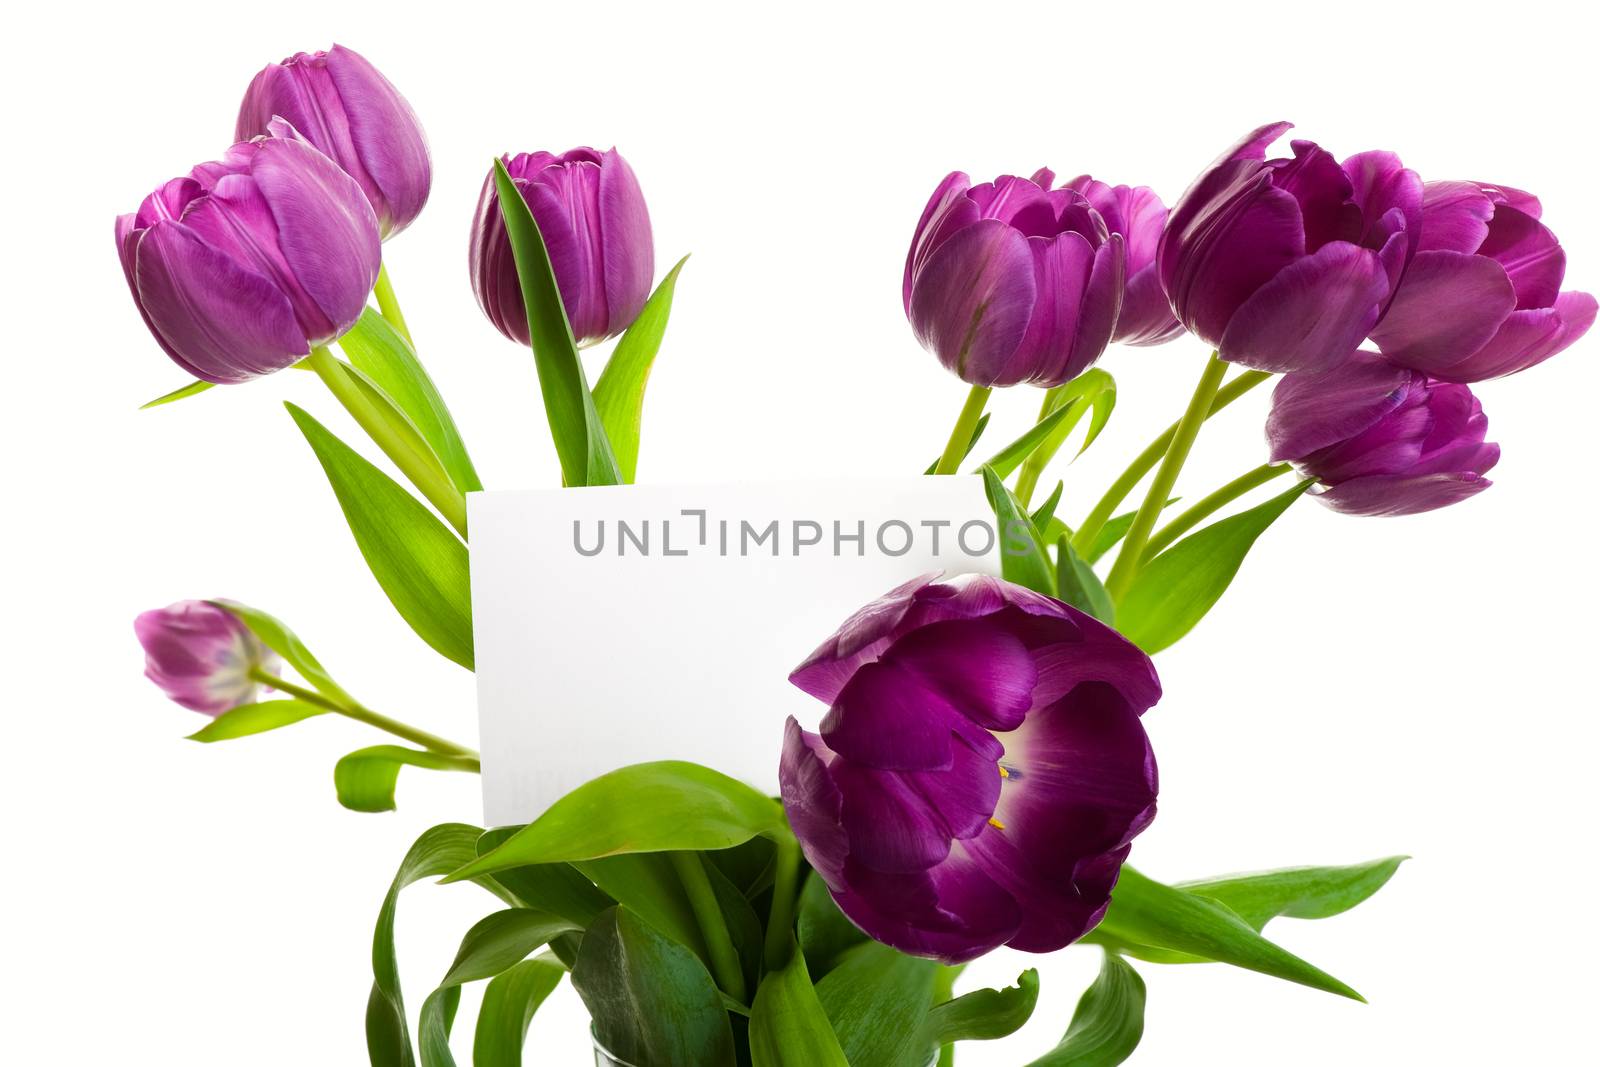 A bouquet of purple tulips with blank card.  Shot on white background.